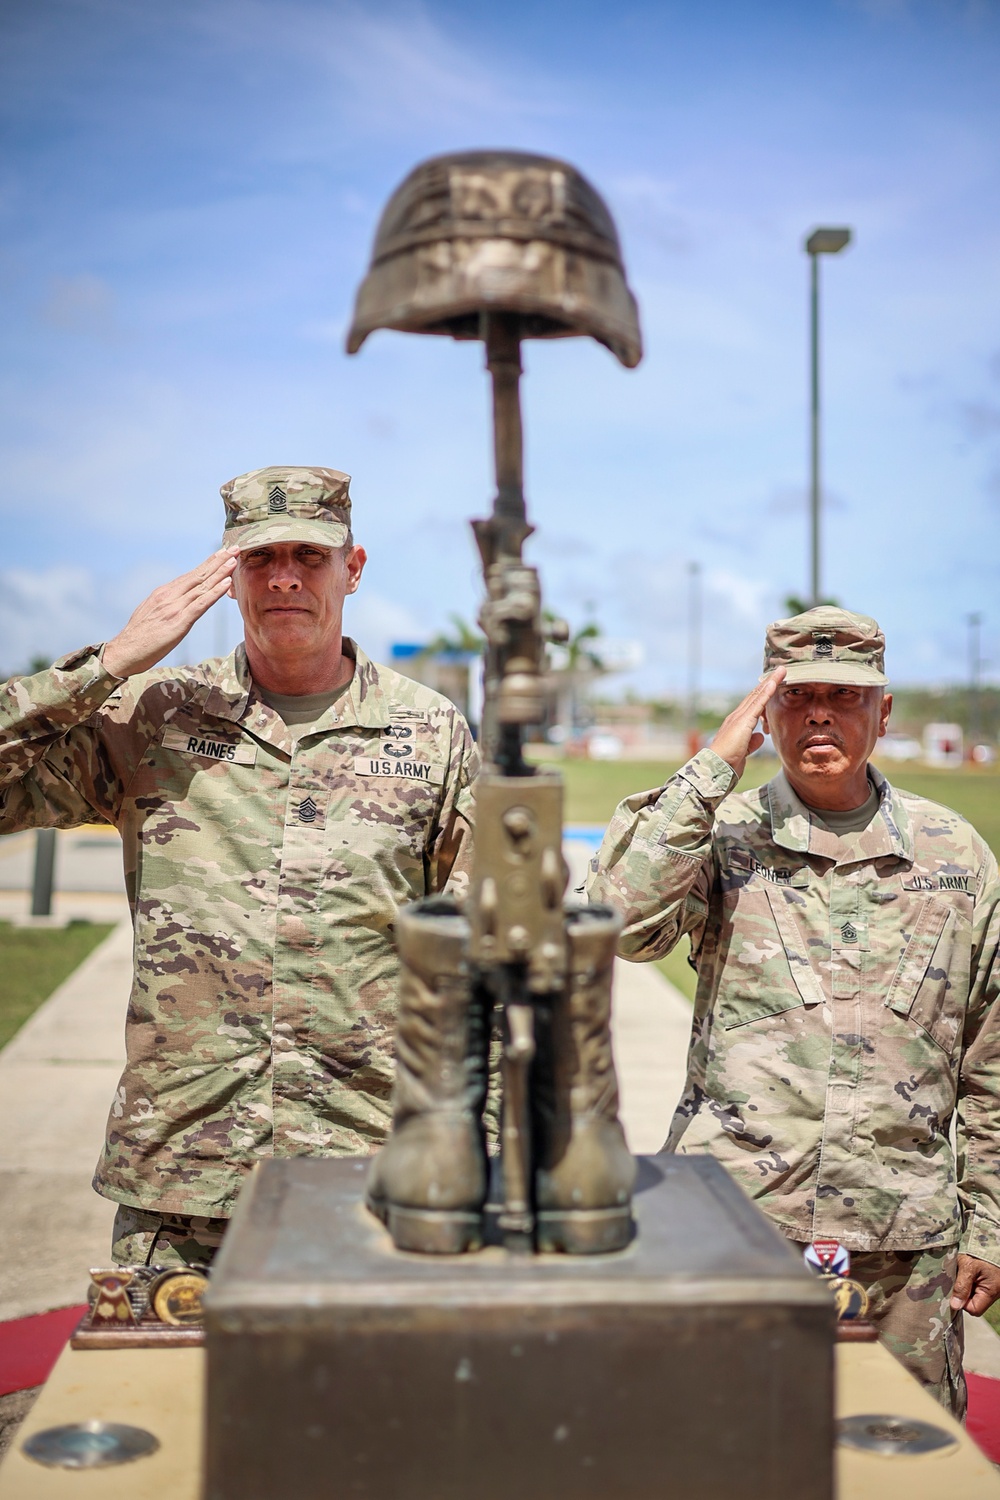 Command Sgt. Maj. of the Army National Guard visits Guam